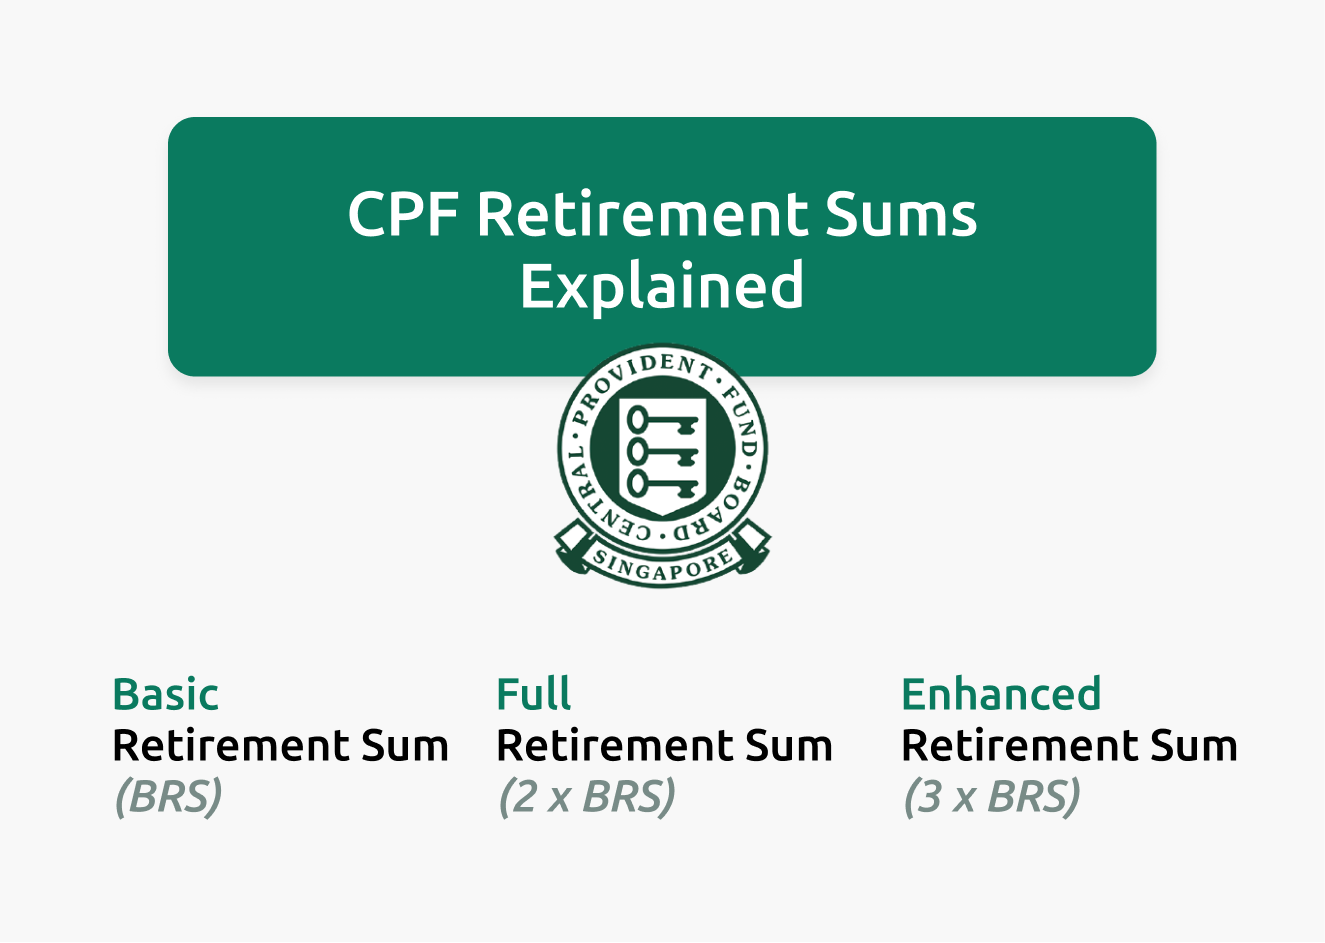 The Ultimate Guide To The CPF Retirement Sums Financially Independent